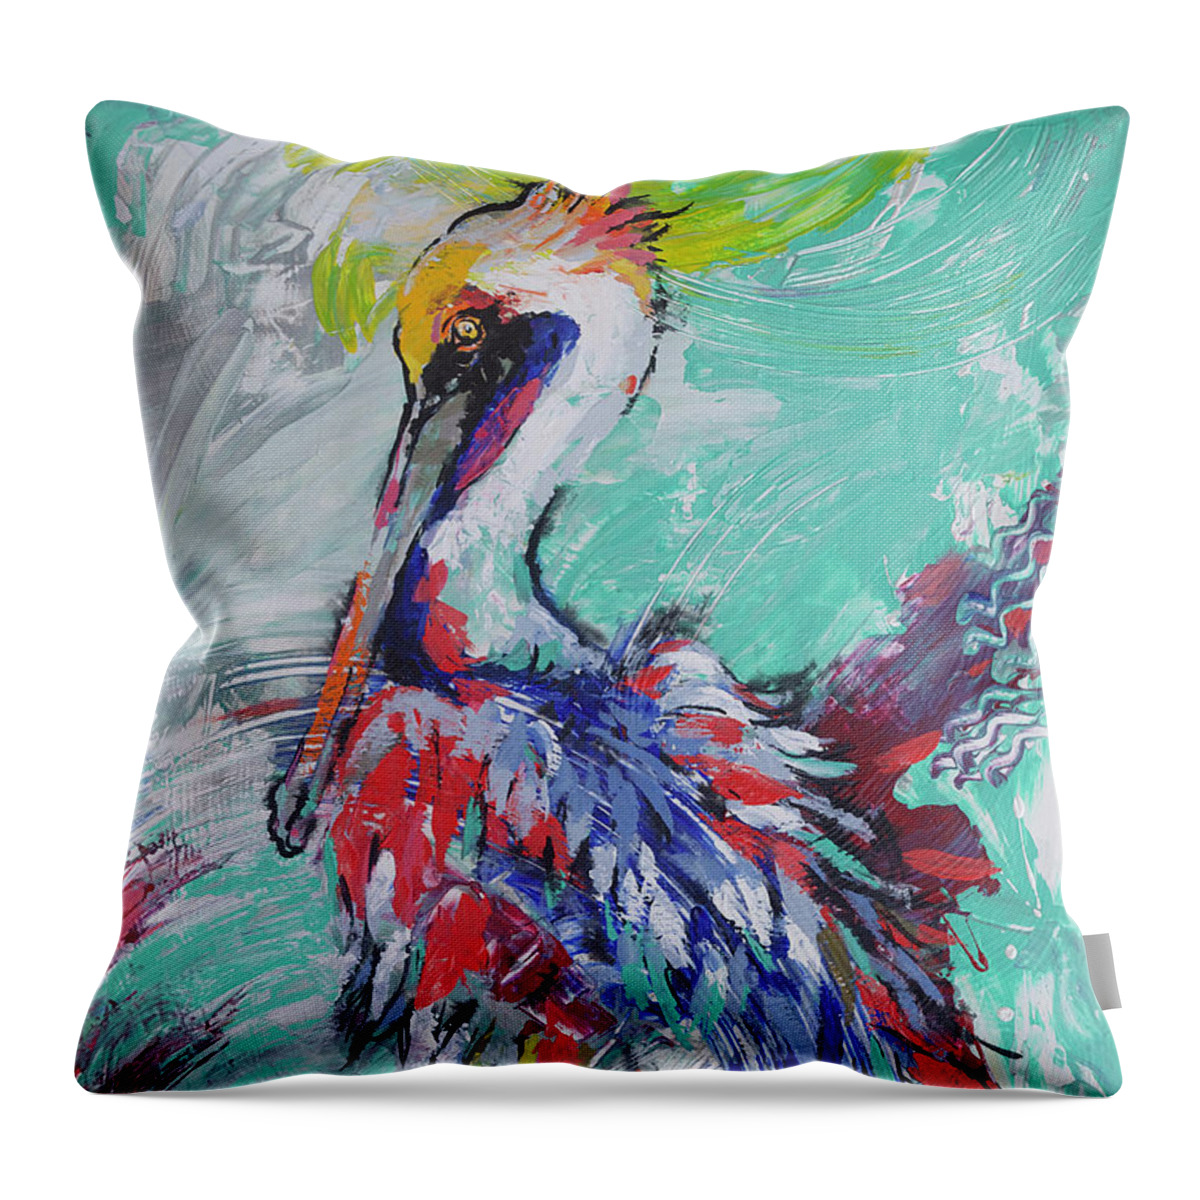 Pelican Throw Pillow featuring the painting Pelican Perch by Jyotika Shroff